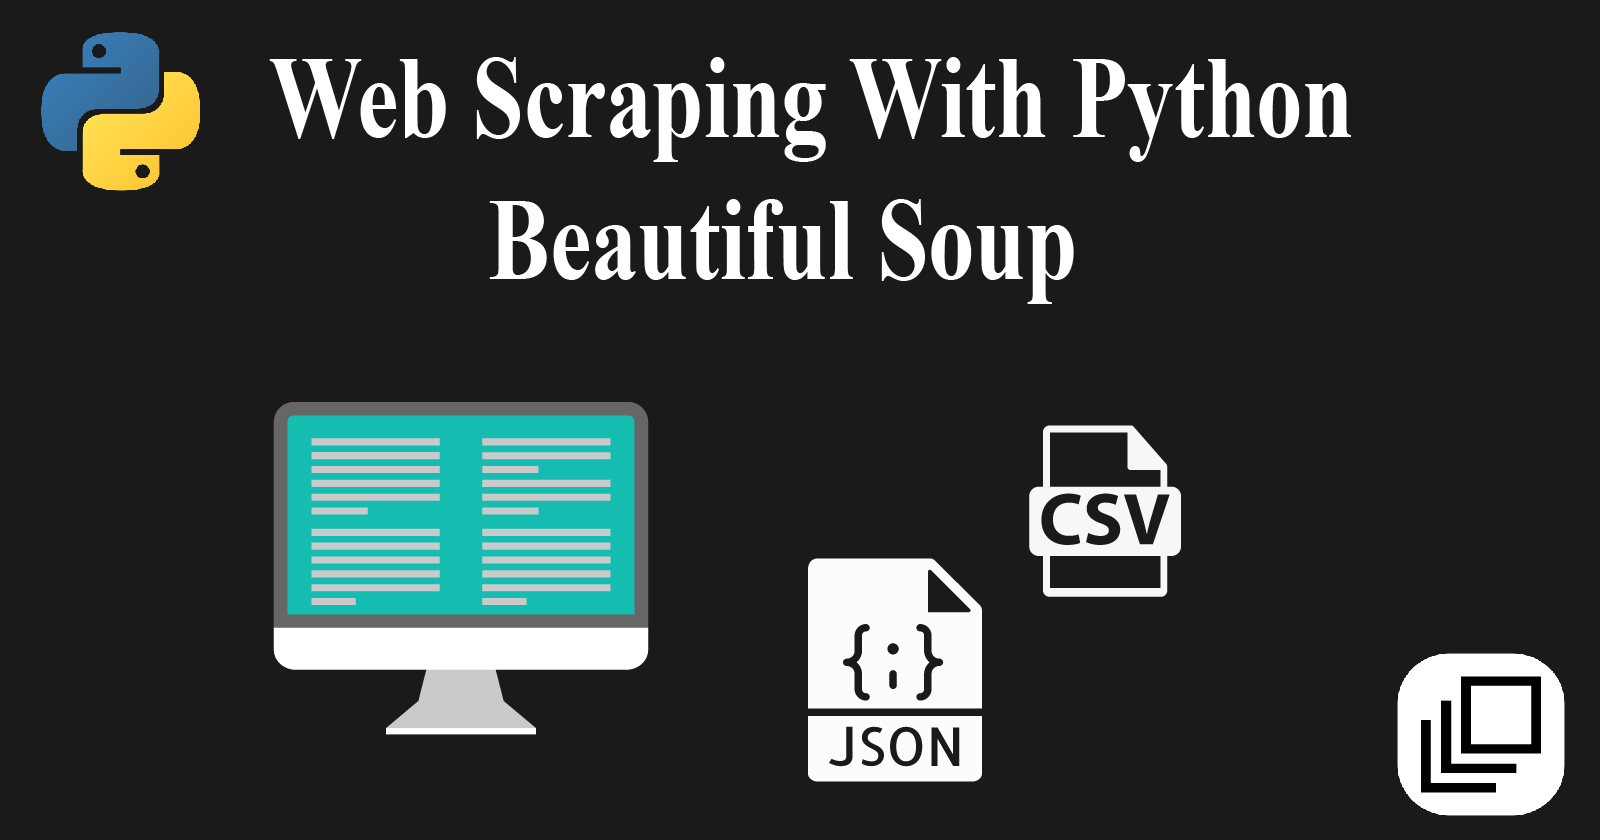 Web Scraping with Python - Beautiful Soup